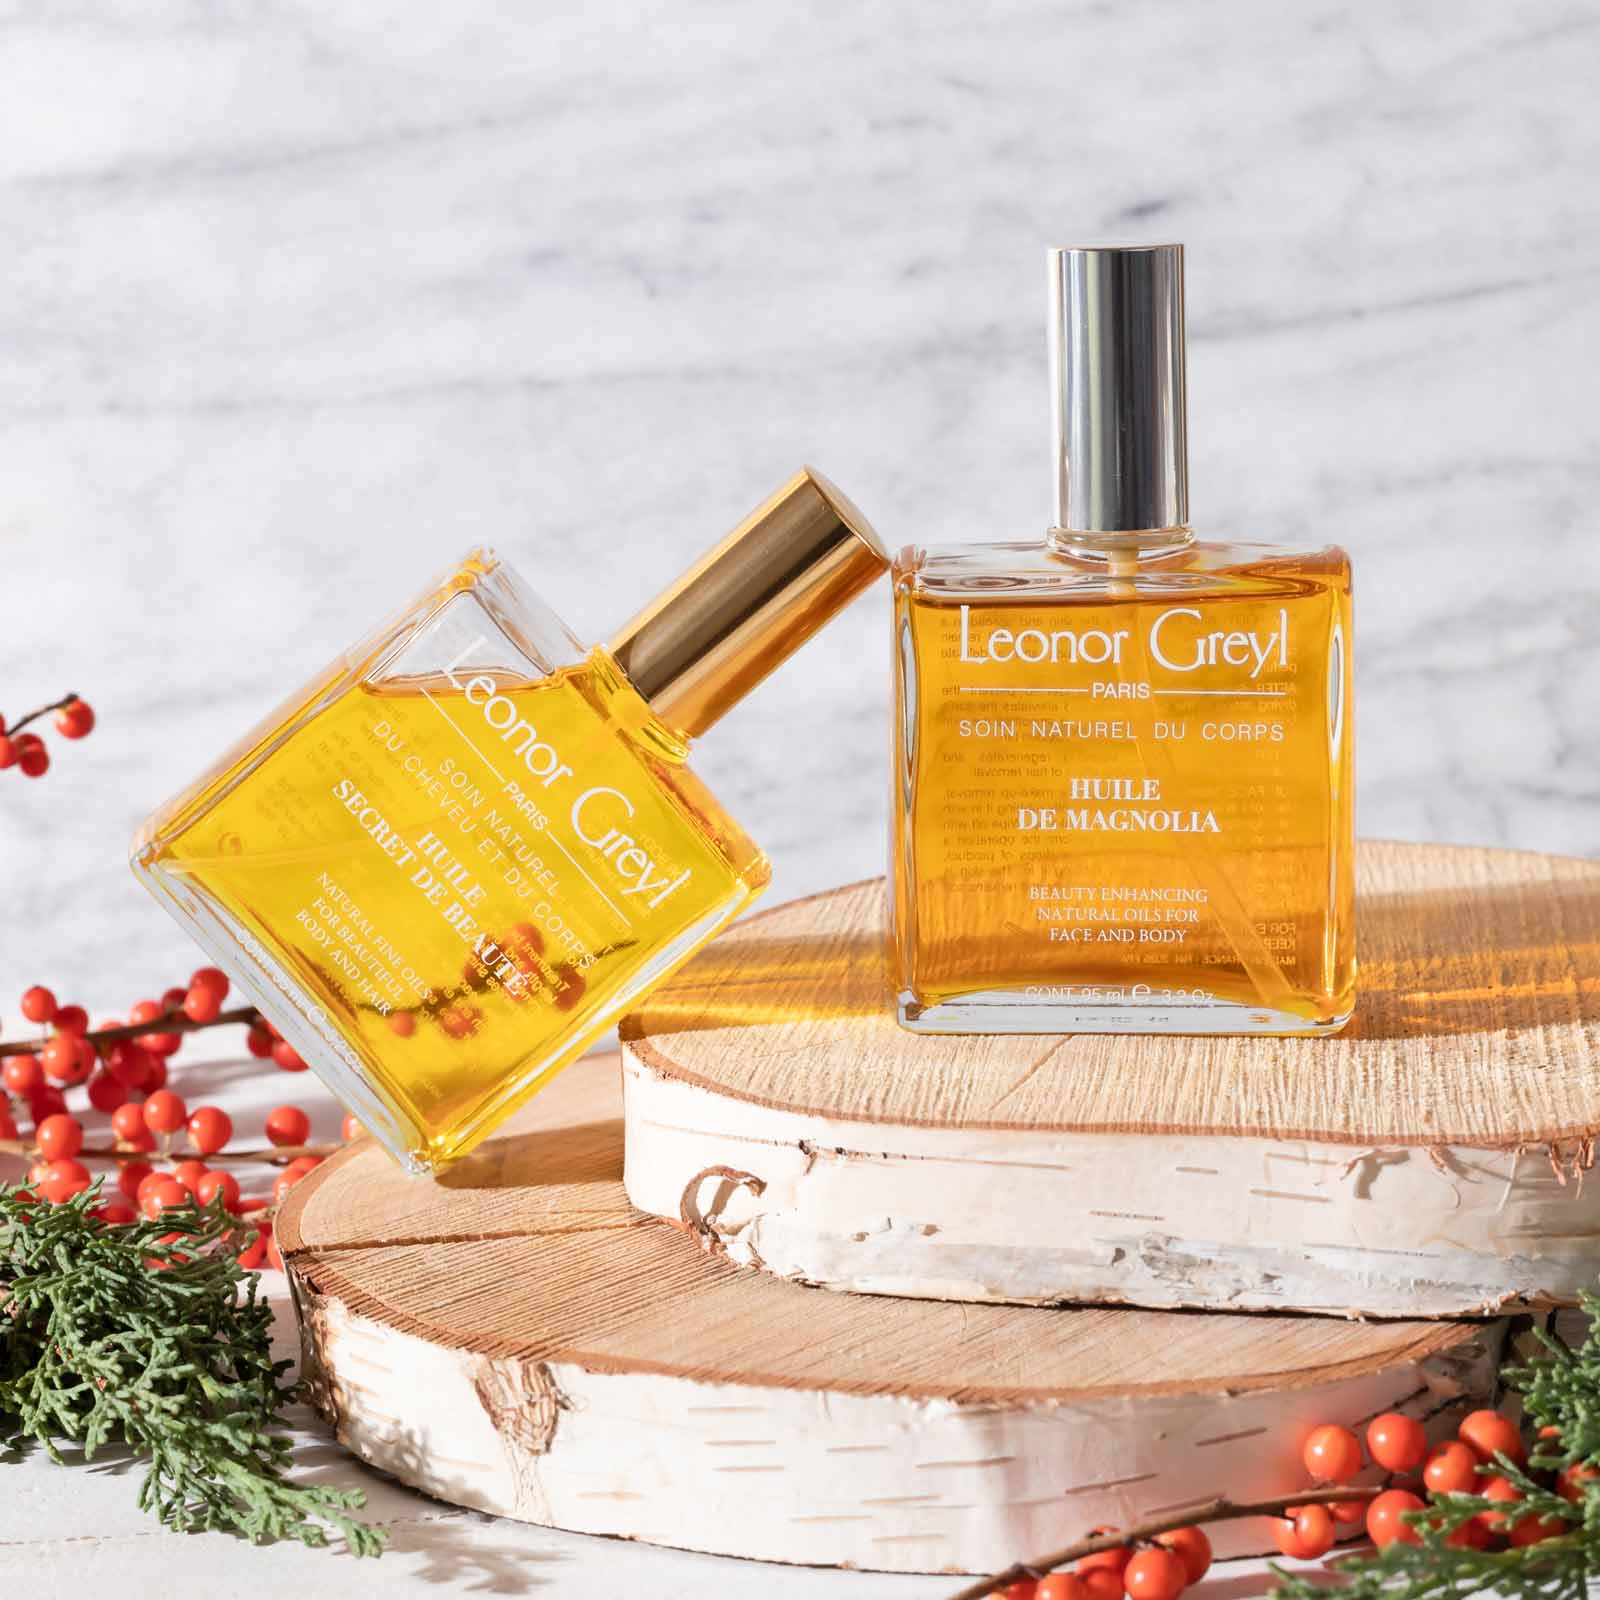 Two Leonor Greyl beauty oils on rustic wood trays with holly berries and greens